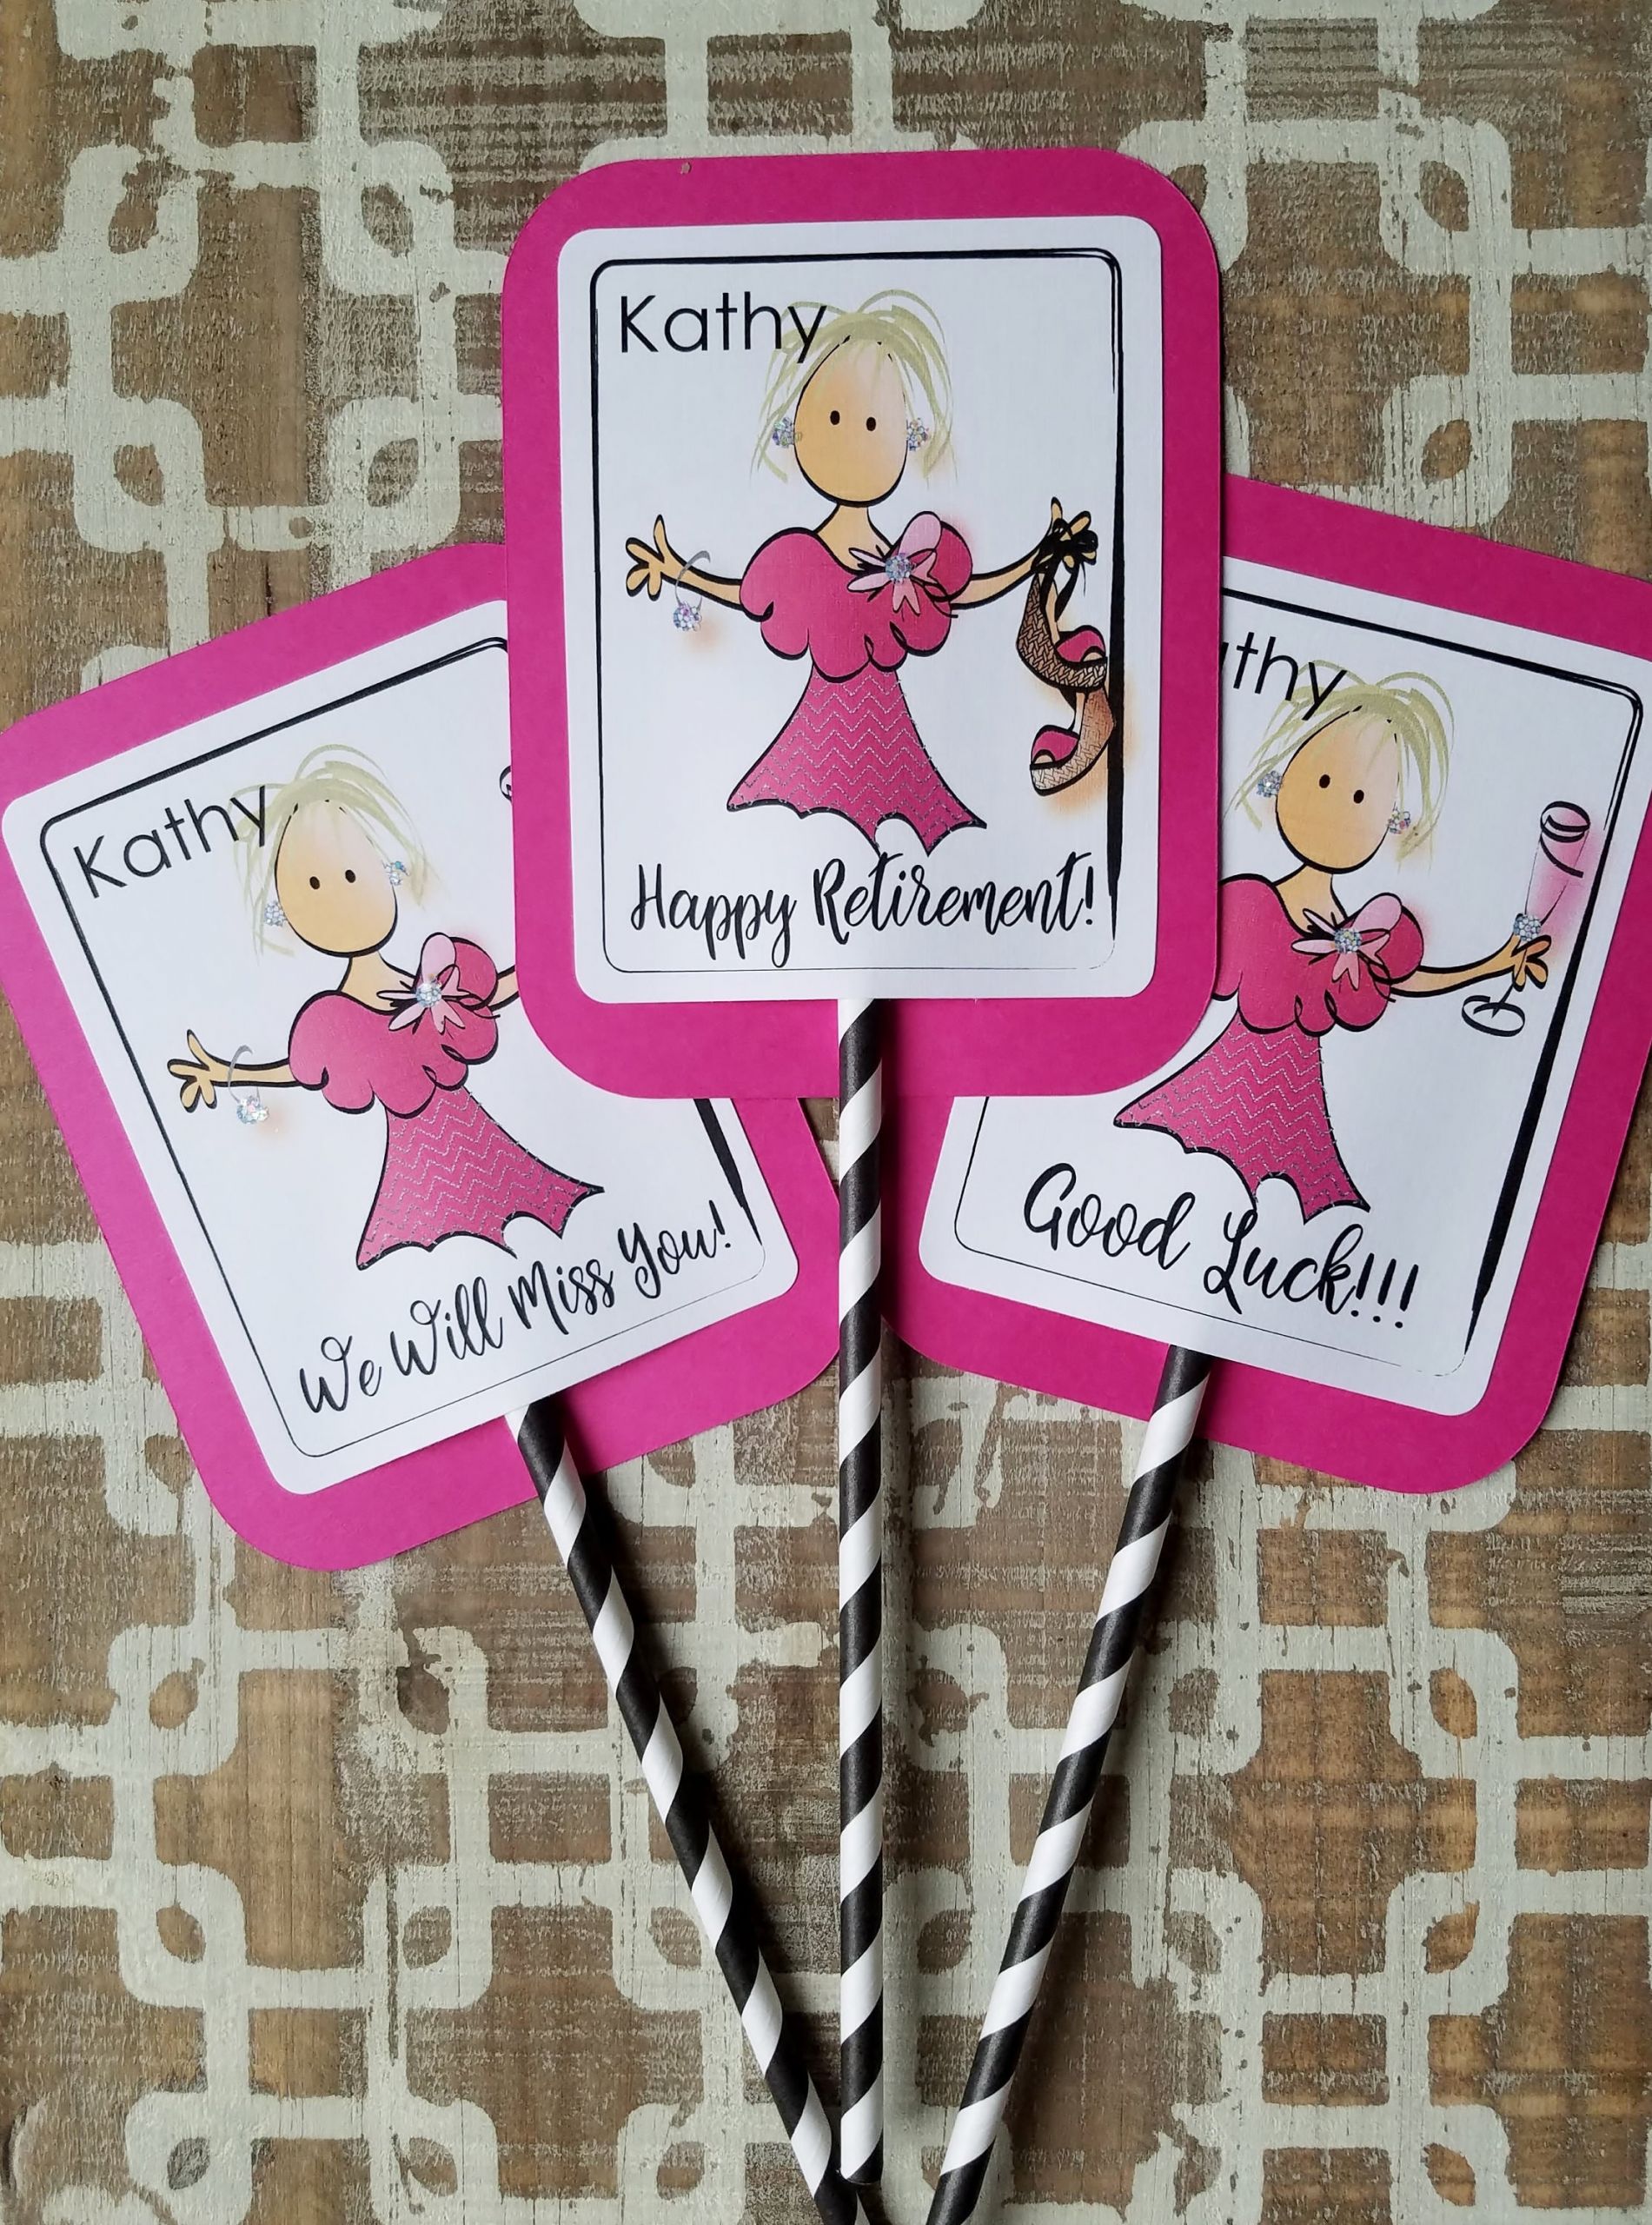 Happy Retirement Party Ideas
 Funny Happy Retirement Party Decor for Her Personalized